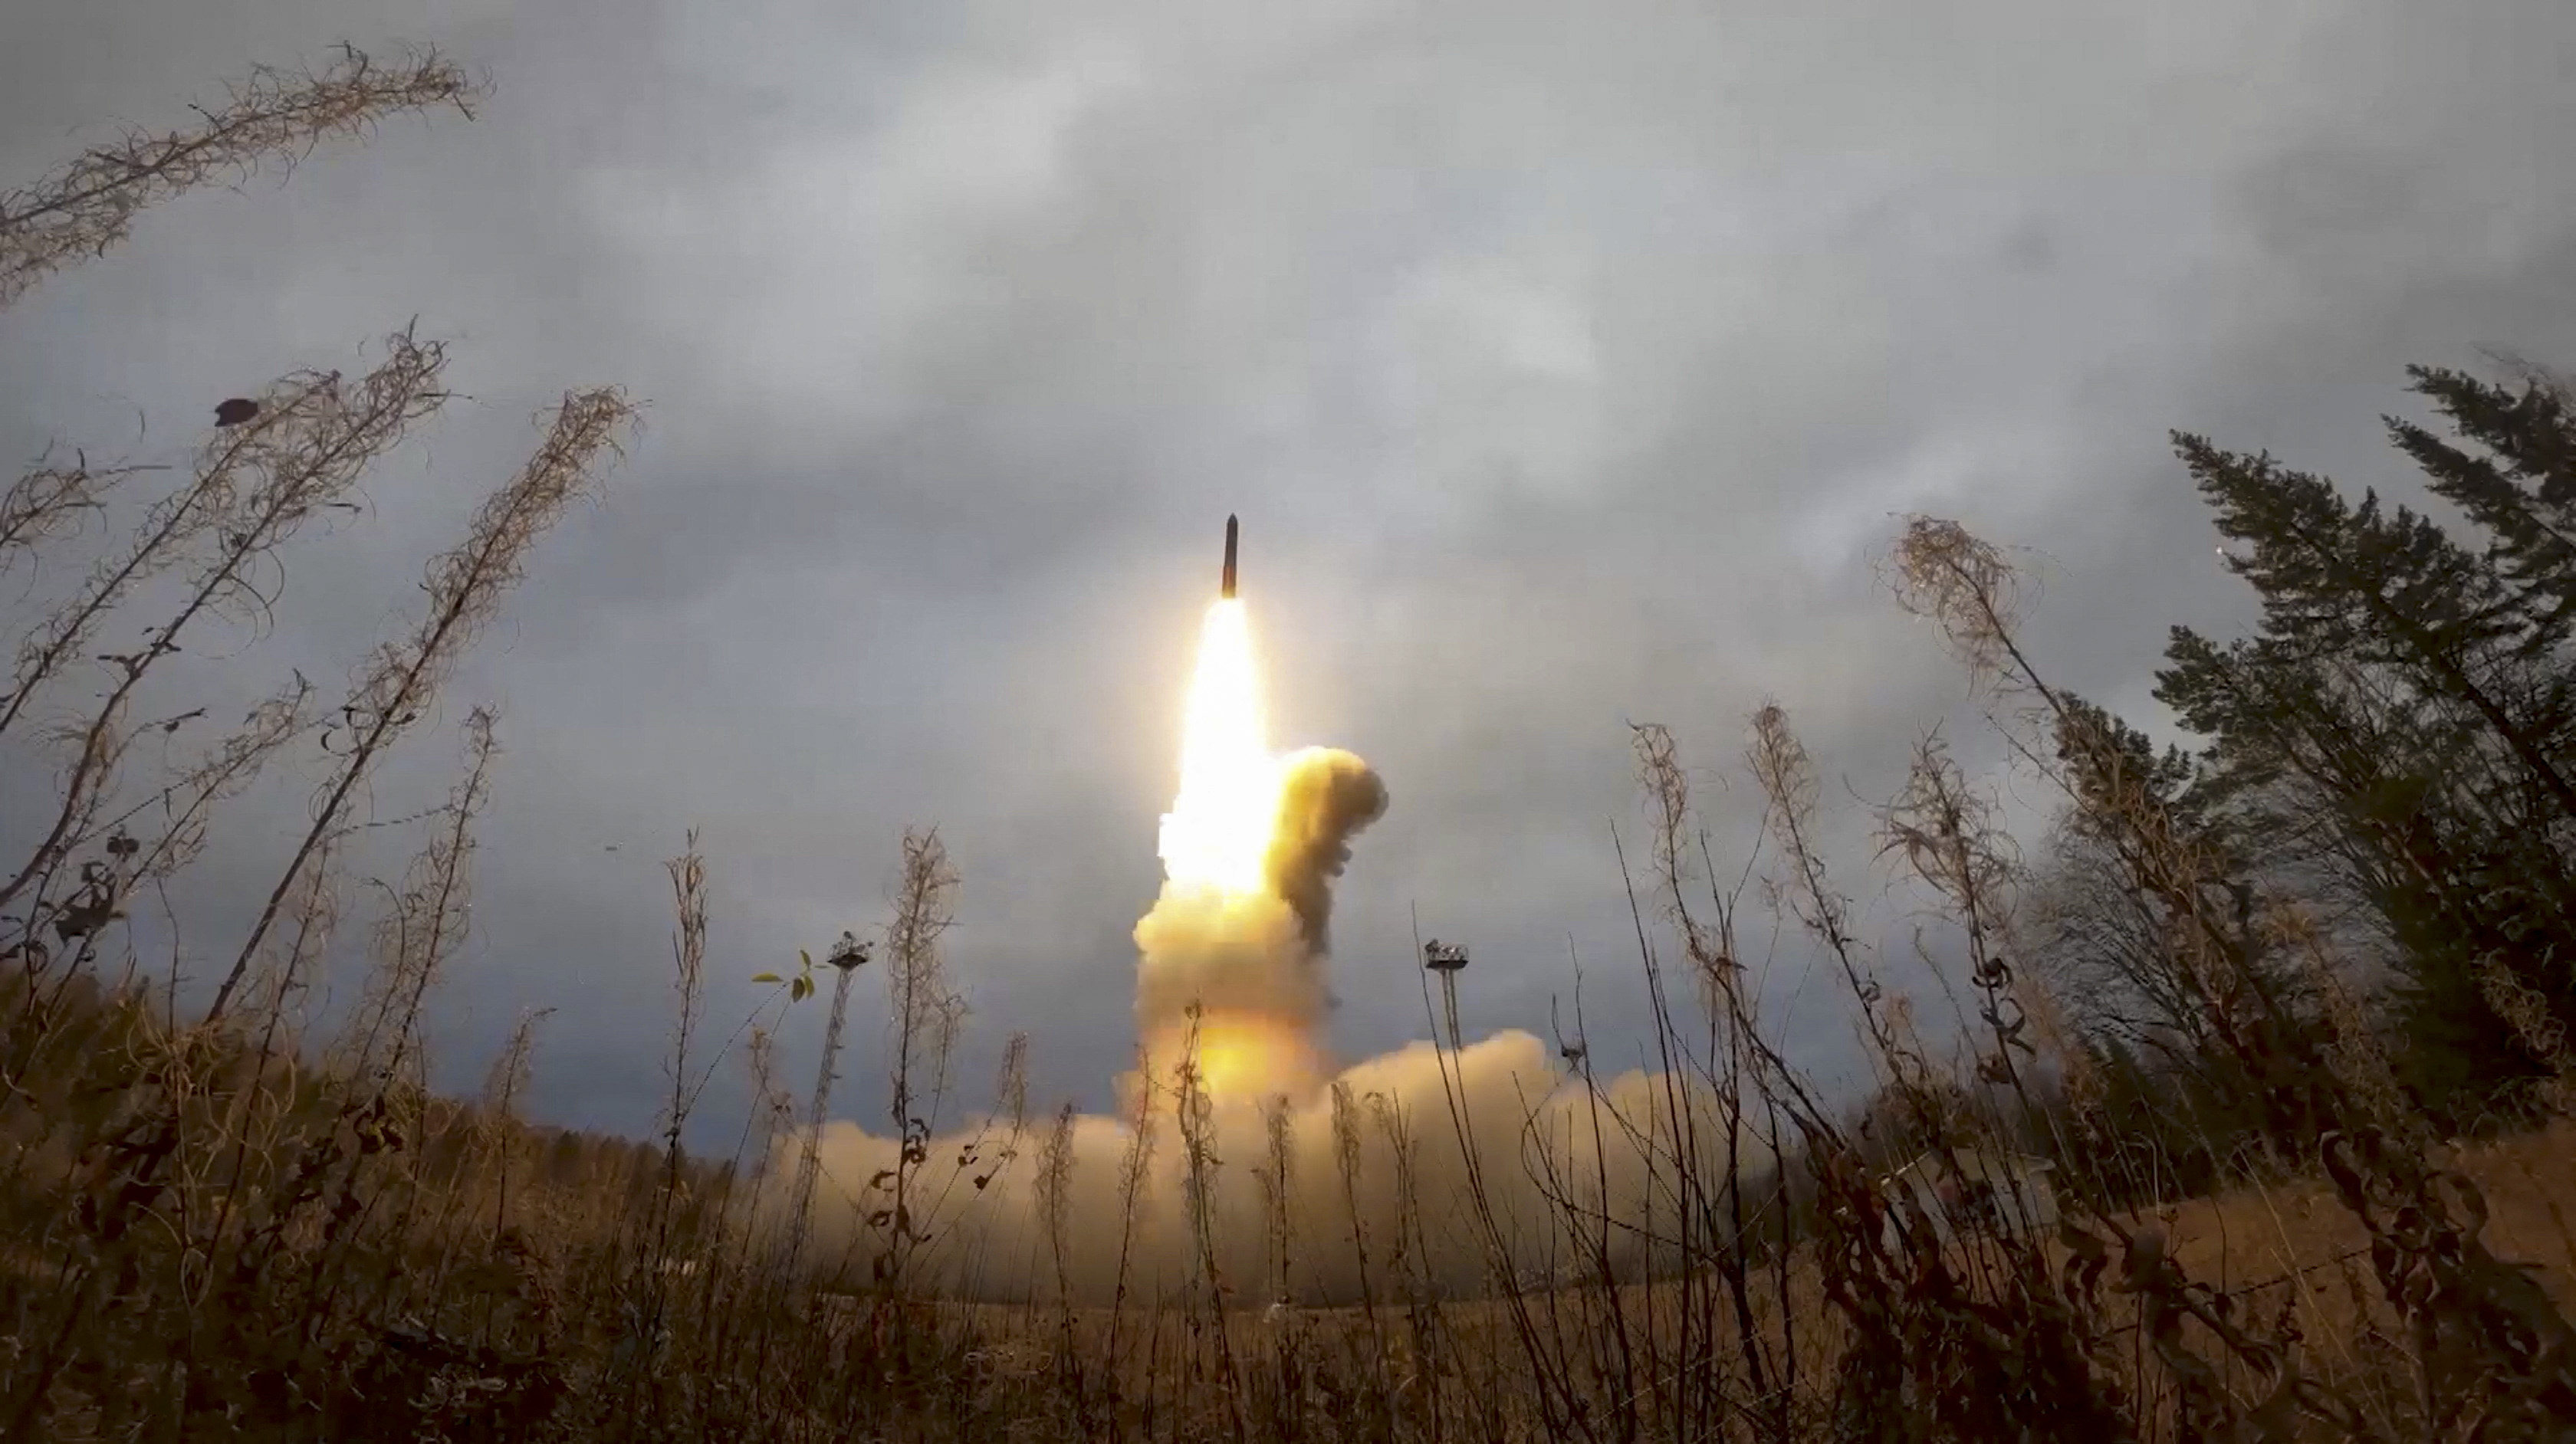 An intercontinental ballistic missile is launched during exercises by the  Russian strategic nuclear forces last month. Photo: Handout via Reuters